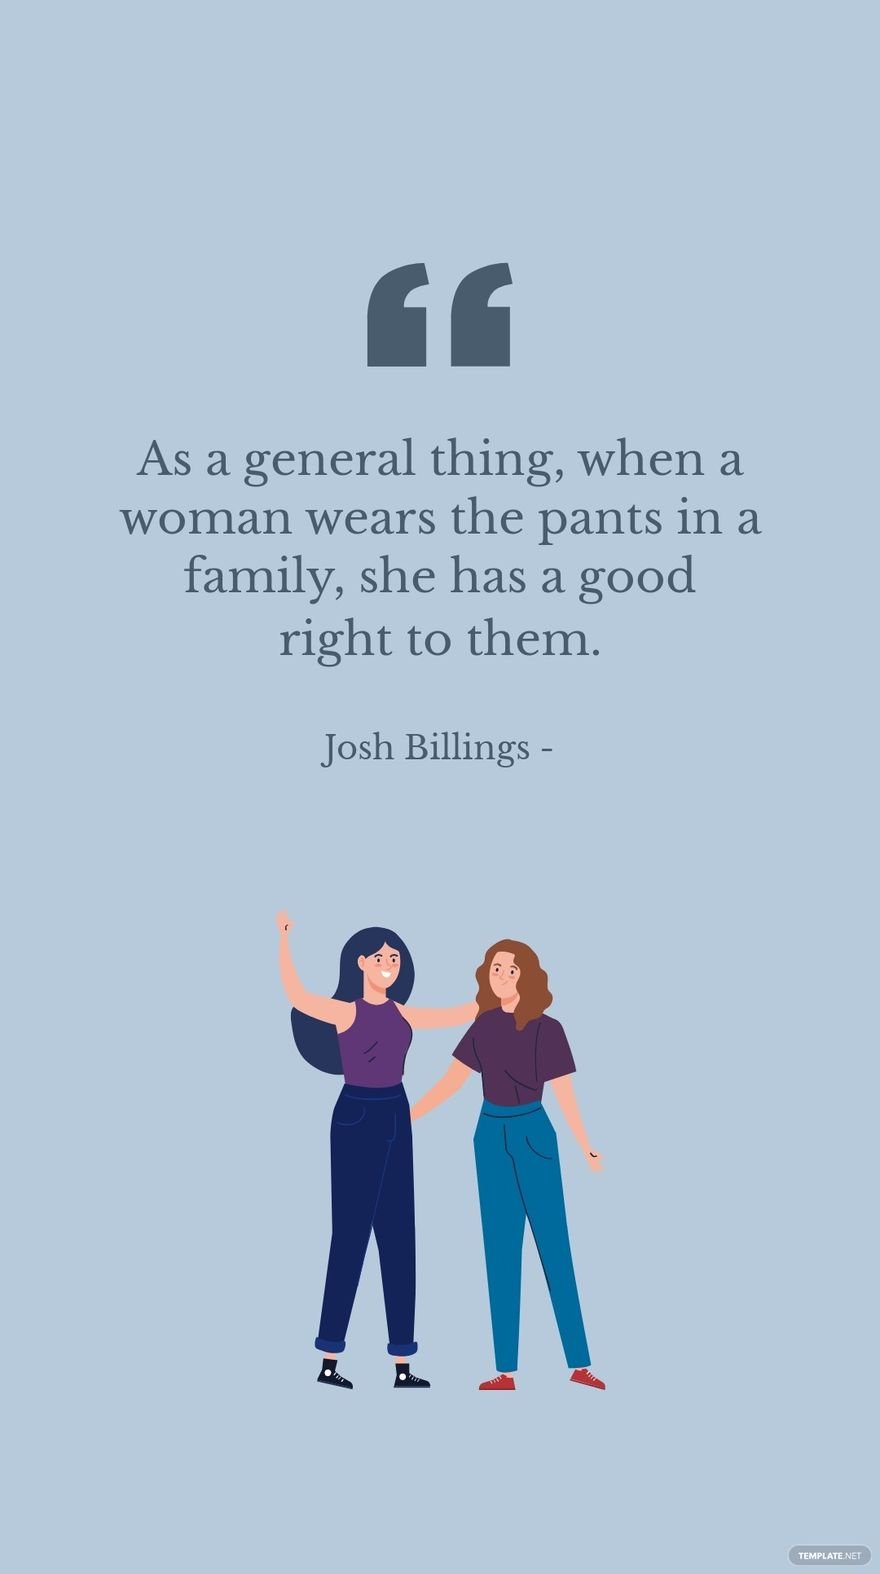 Josh Billings - As a general thing, when a woman wears the pants in a family, she has a good right to them.